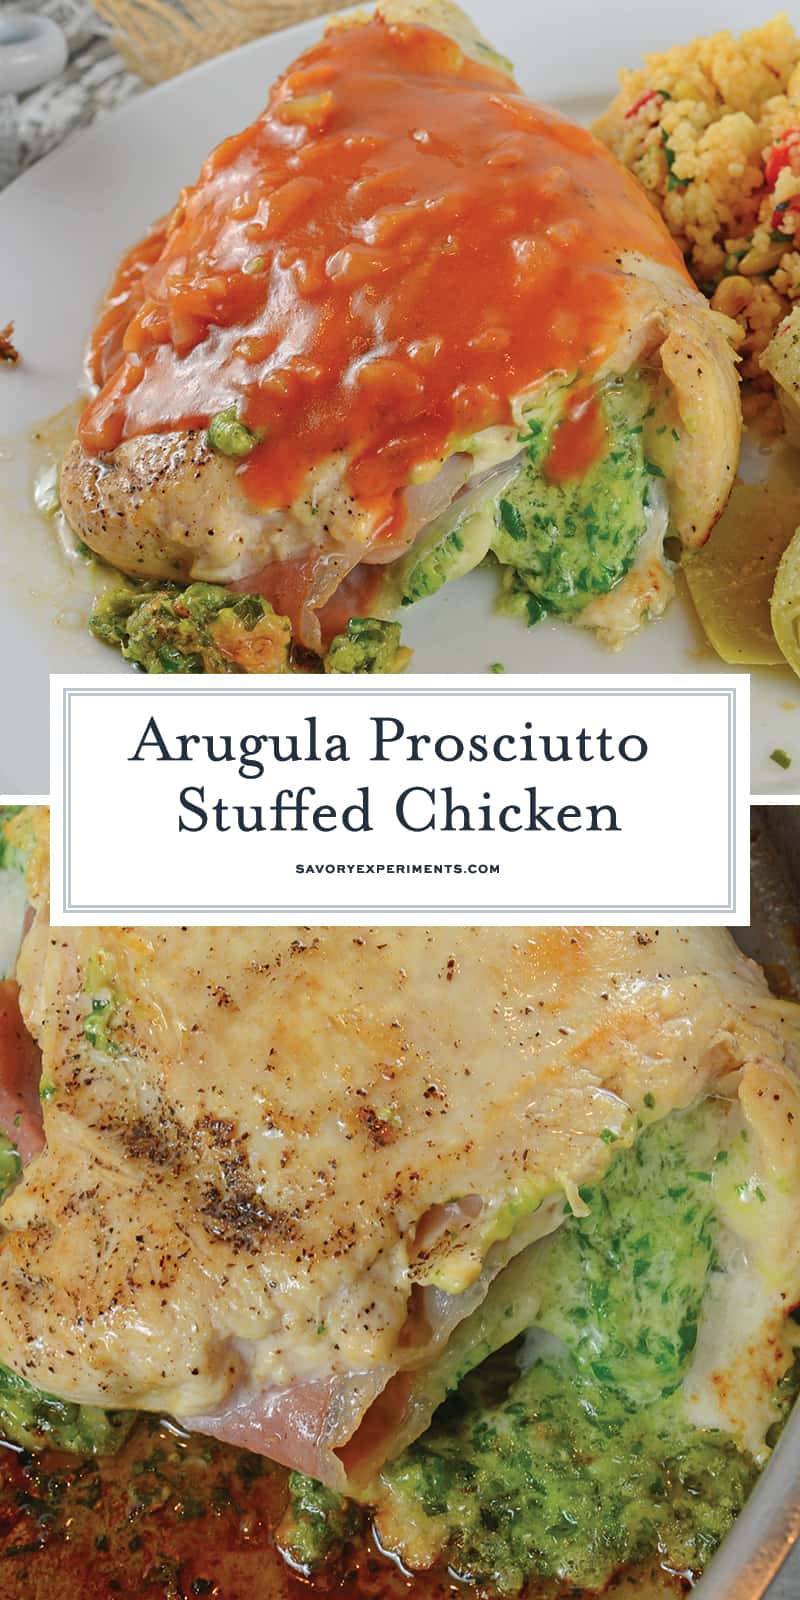 Arugula Prosciutto Stuffed Chicken is topped off with a silky tomato shallot sauce. Baked chicken recipes are great, but cheese stuffed chicken breasts are even better! #cheesestuffedchickenbreast #bakedchickenrecipe #stuffedchickenbreastrecipe www.savoryexperiments.com